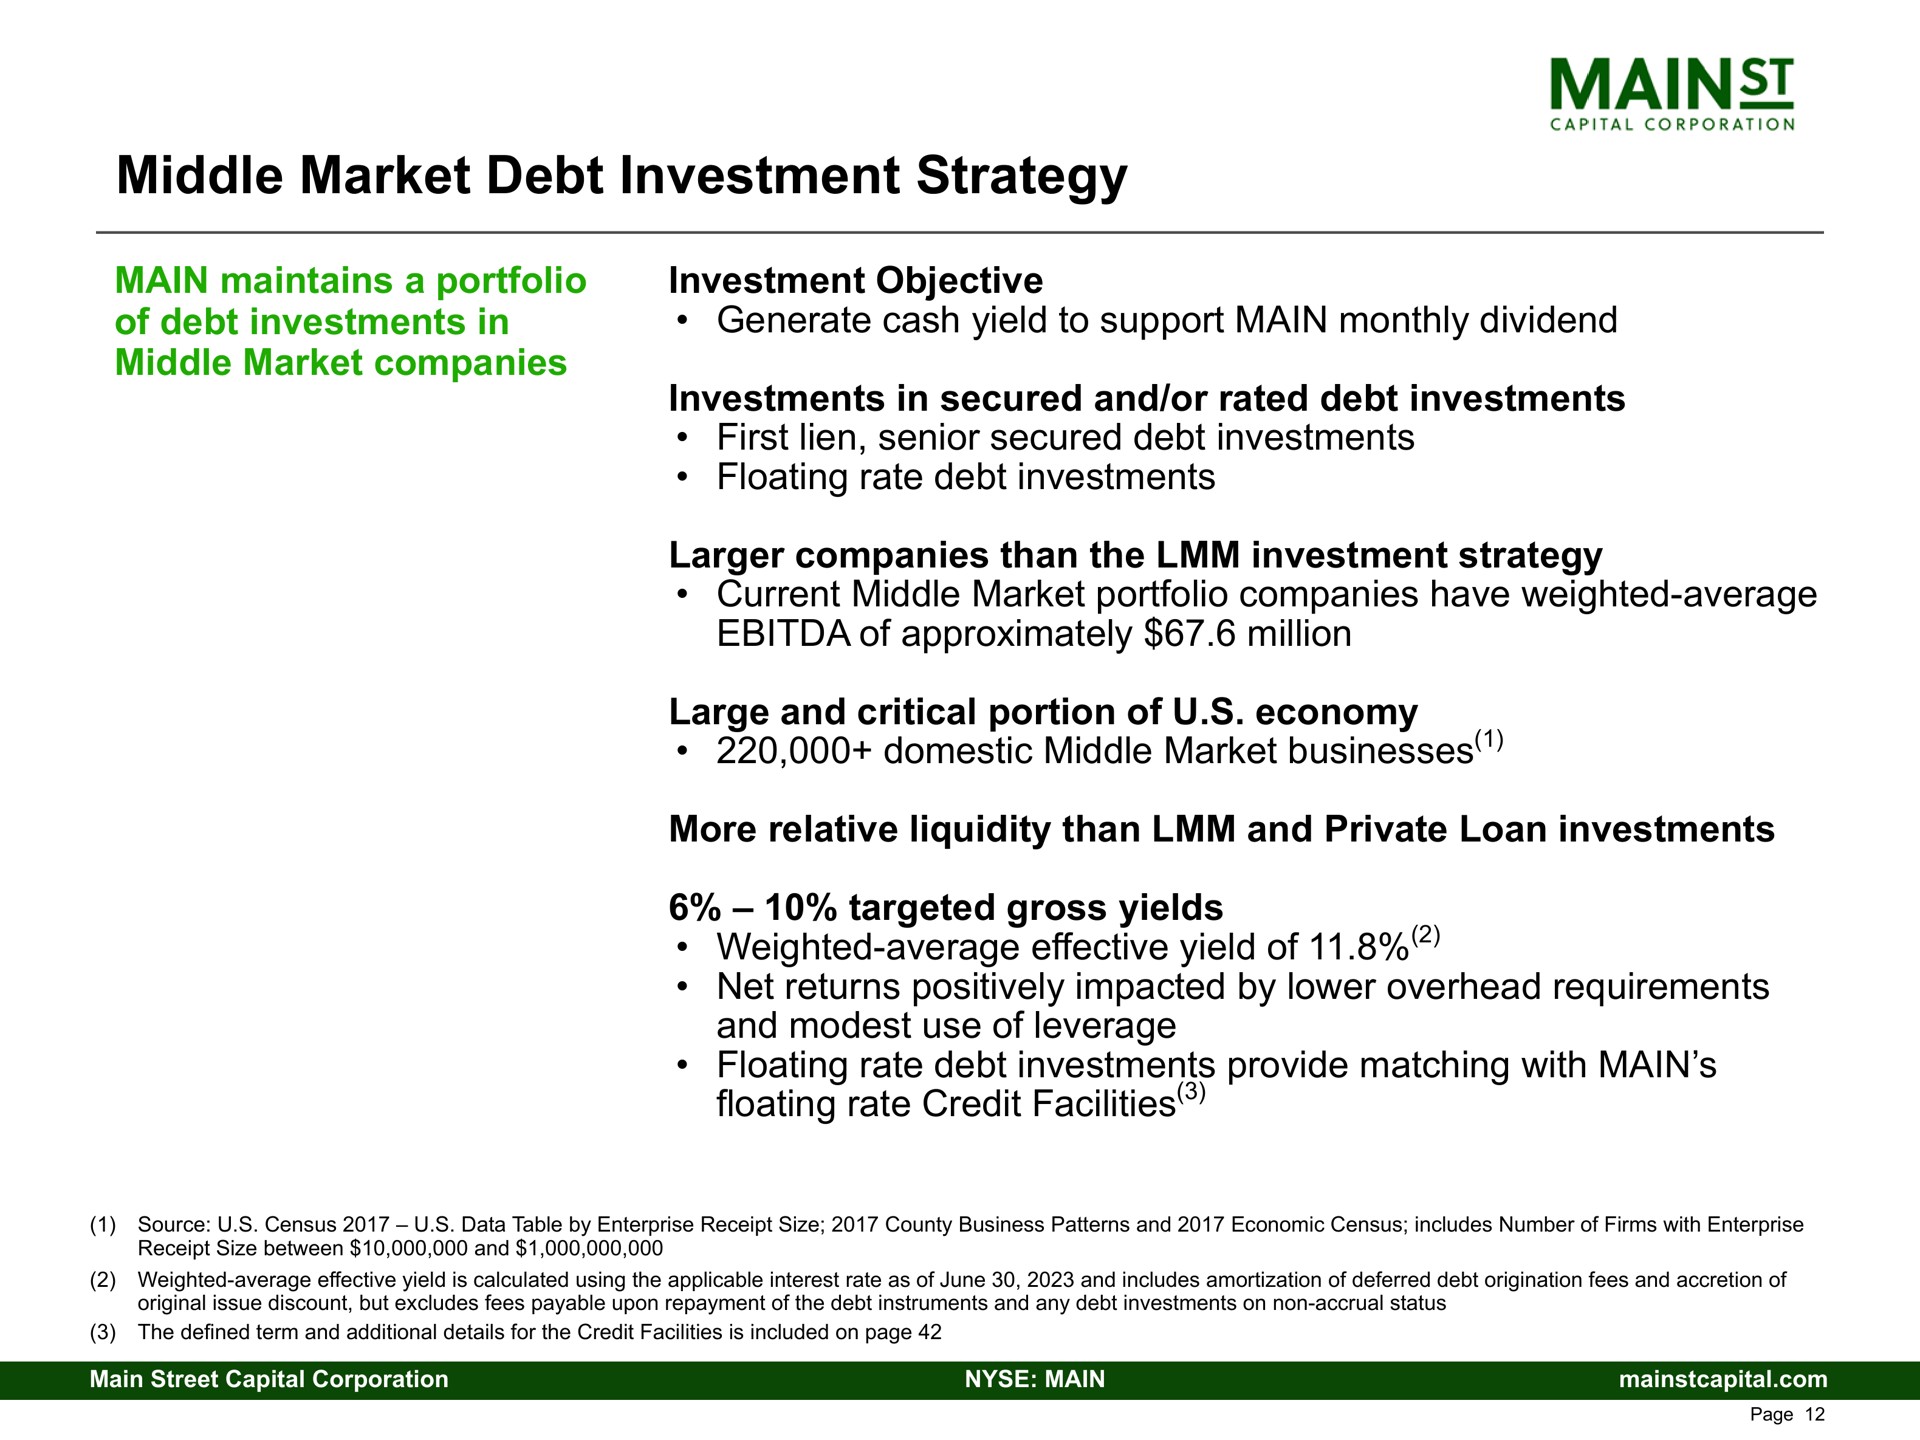 middle market debt investment strategy mains domestic businesses floating rate credit facilities | Main Street Capital